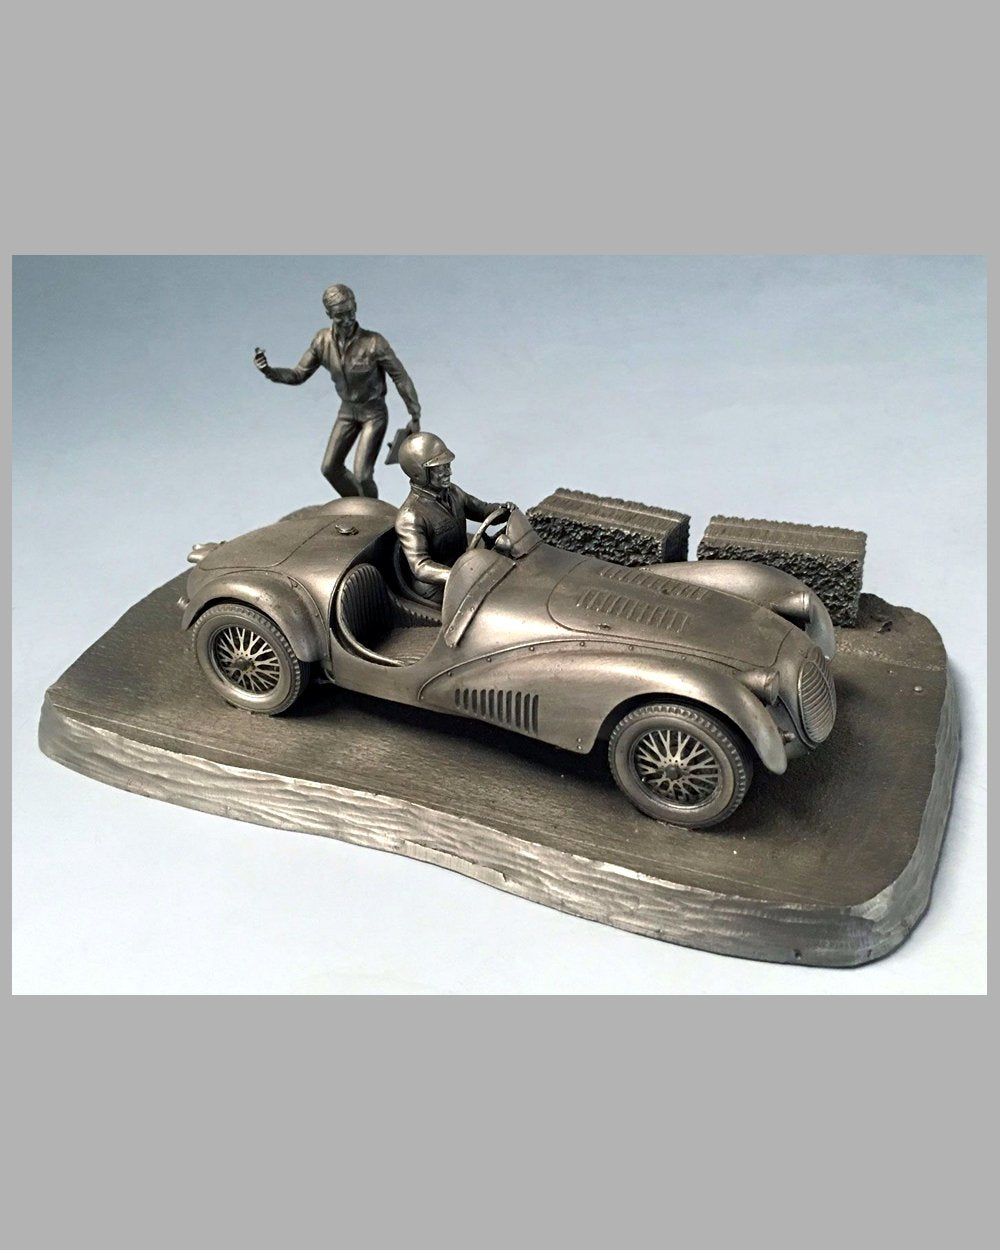 "Into the Straight" pewter sculpture by Raymond Meyers, 1979